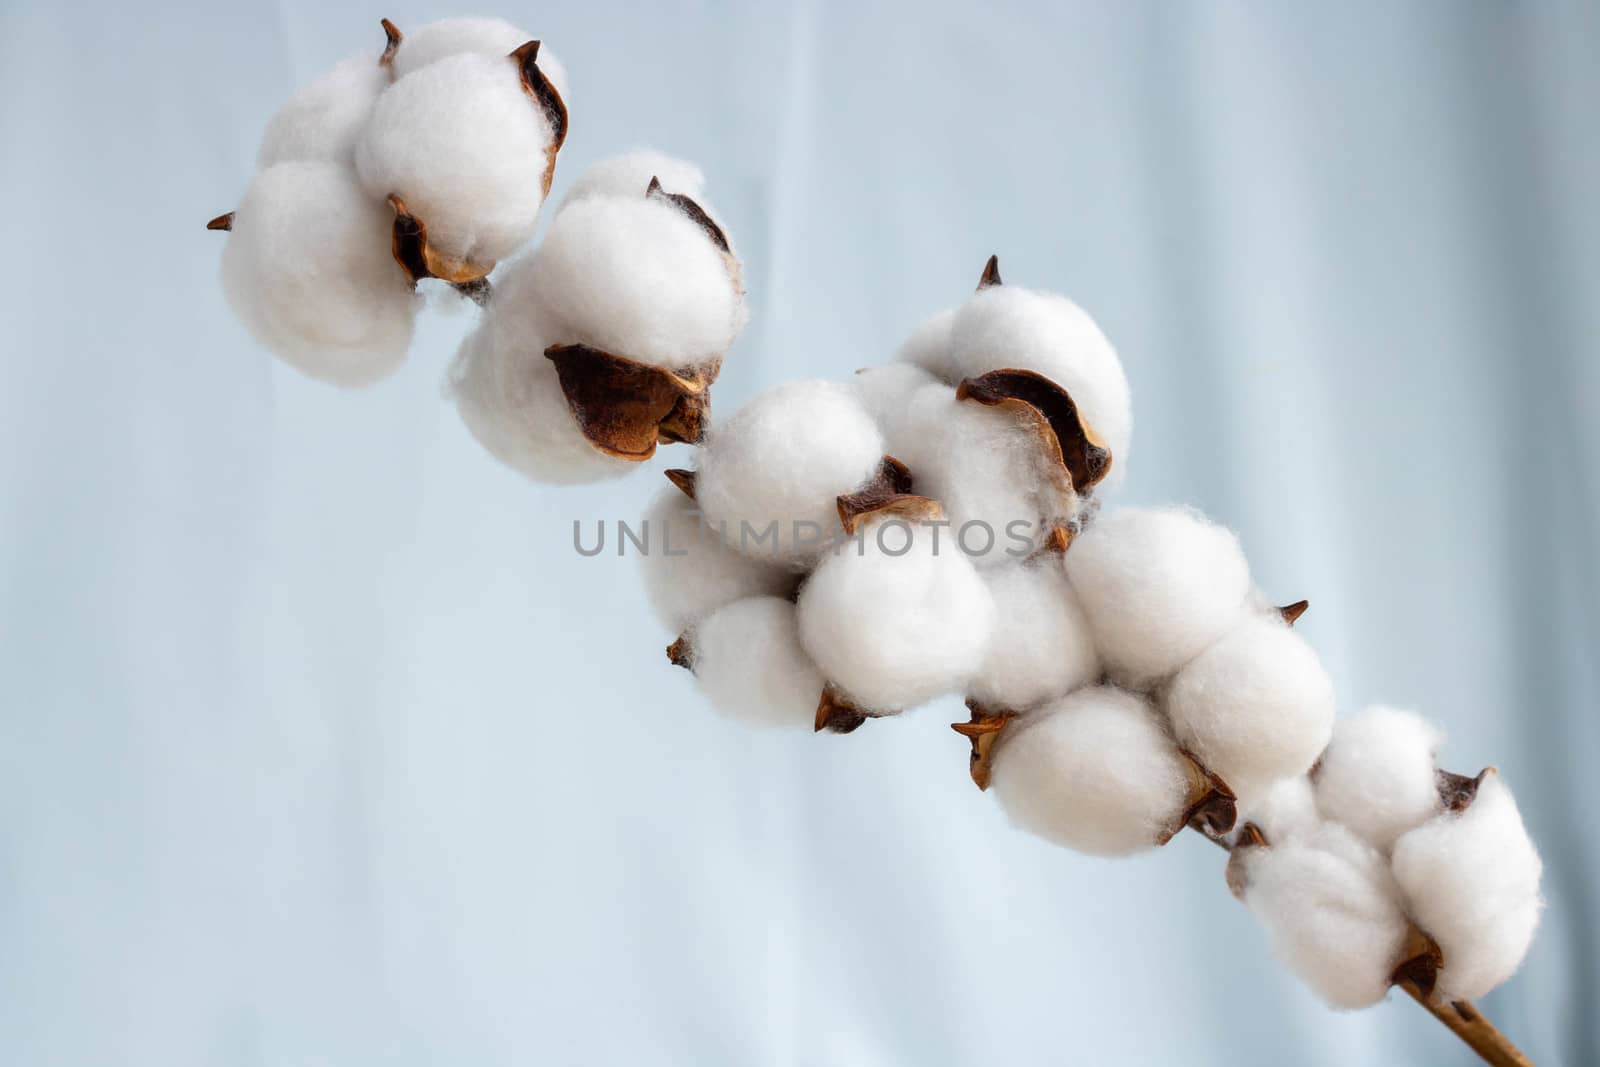 A sprig of cotton on a soft blue fabric by lapushka62